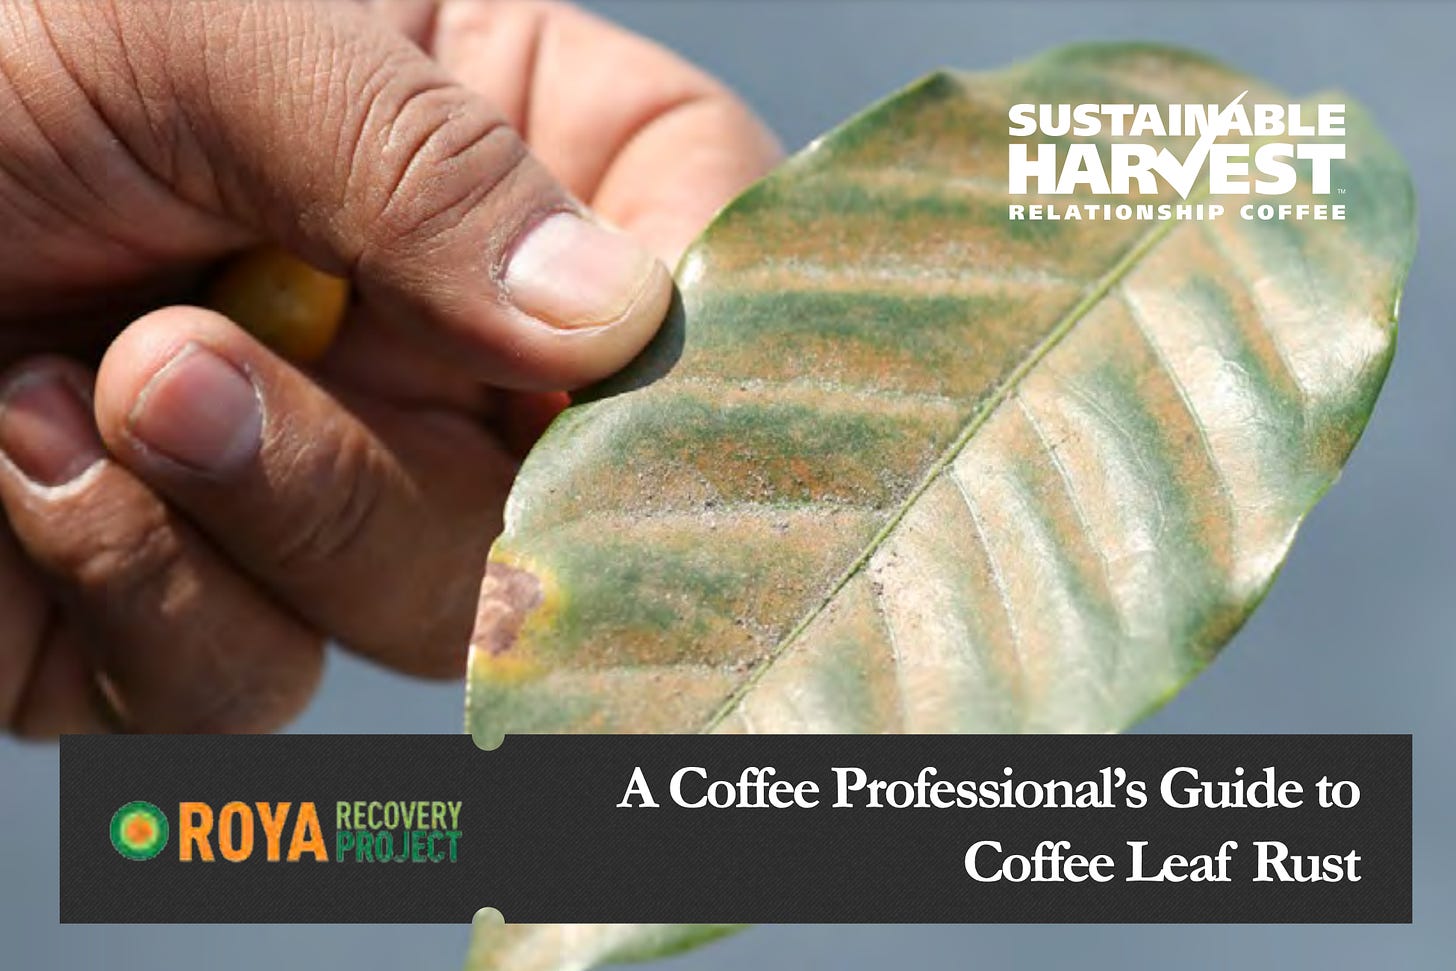 A close up on a green coffee plant leaf covered in roya or coffee rust. The arrowhead shaped leave has stripes of a yellow powdery fungus collected in the middle and spreading to the edges. This is the cover of a booklet, and the title is in a black bar at the bottom, "A Coffee Professional's Guide to Coffee Leaf Rust."